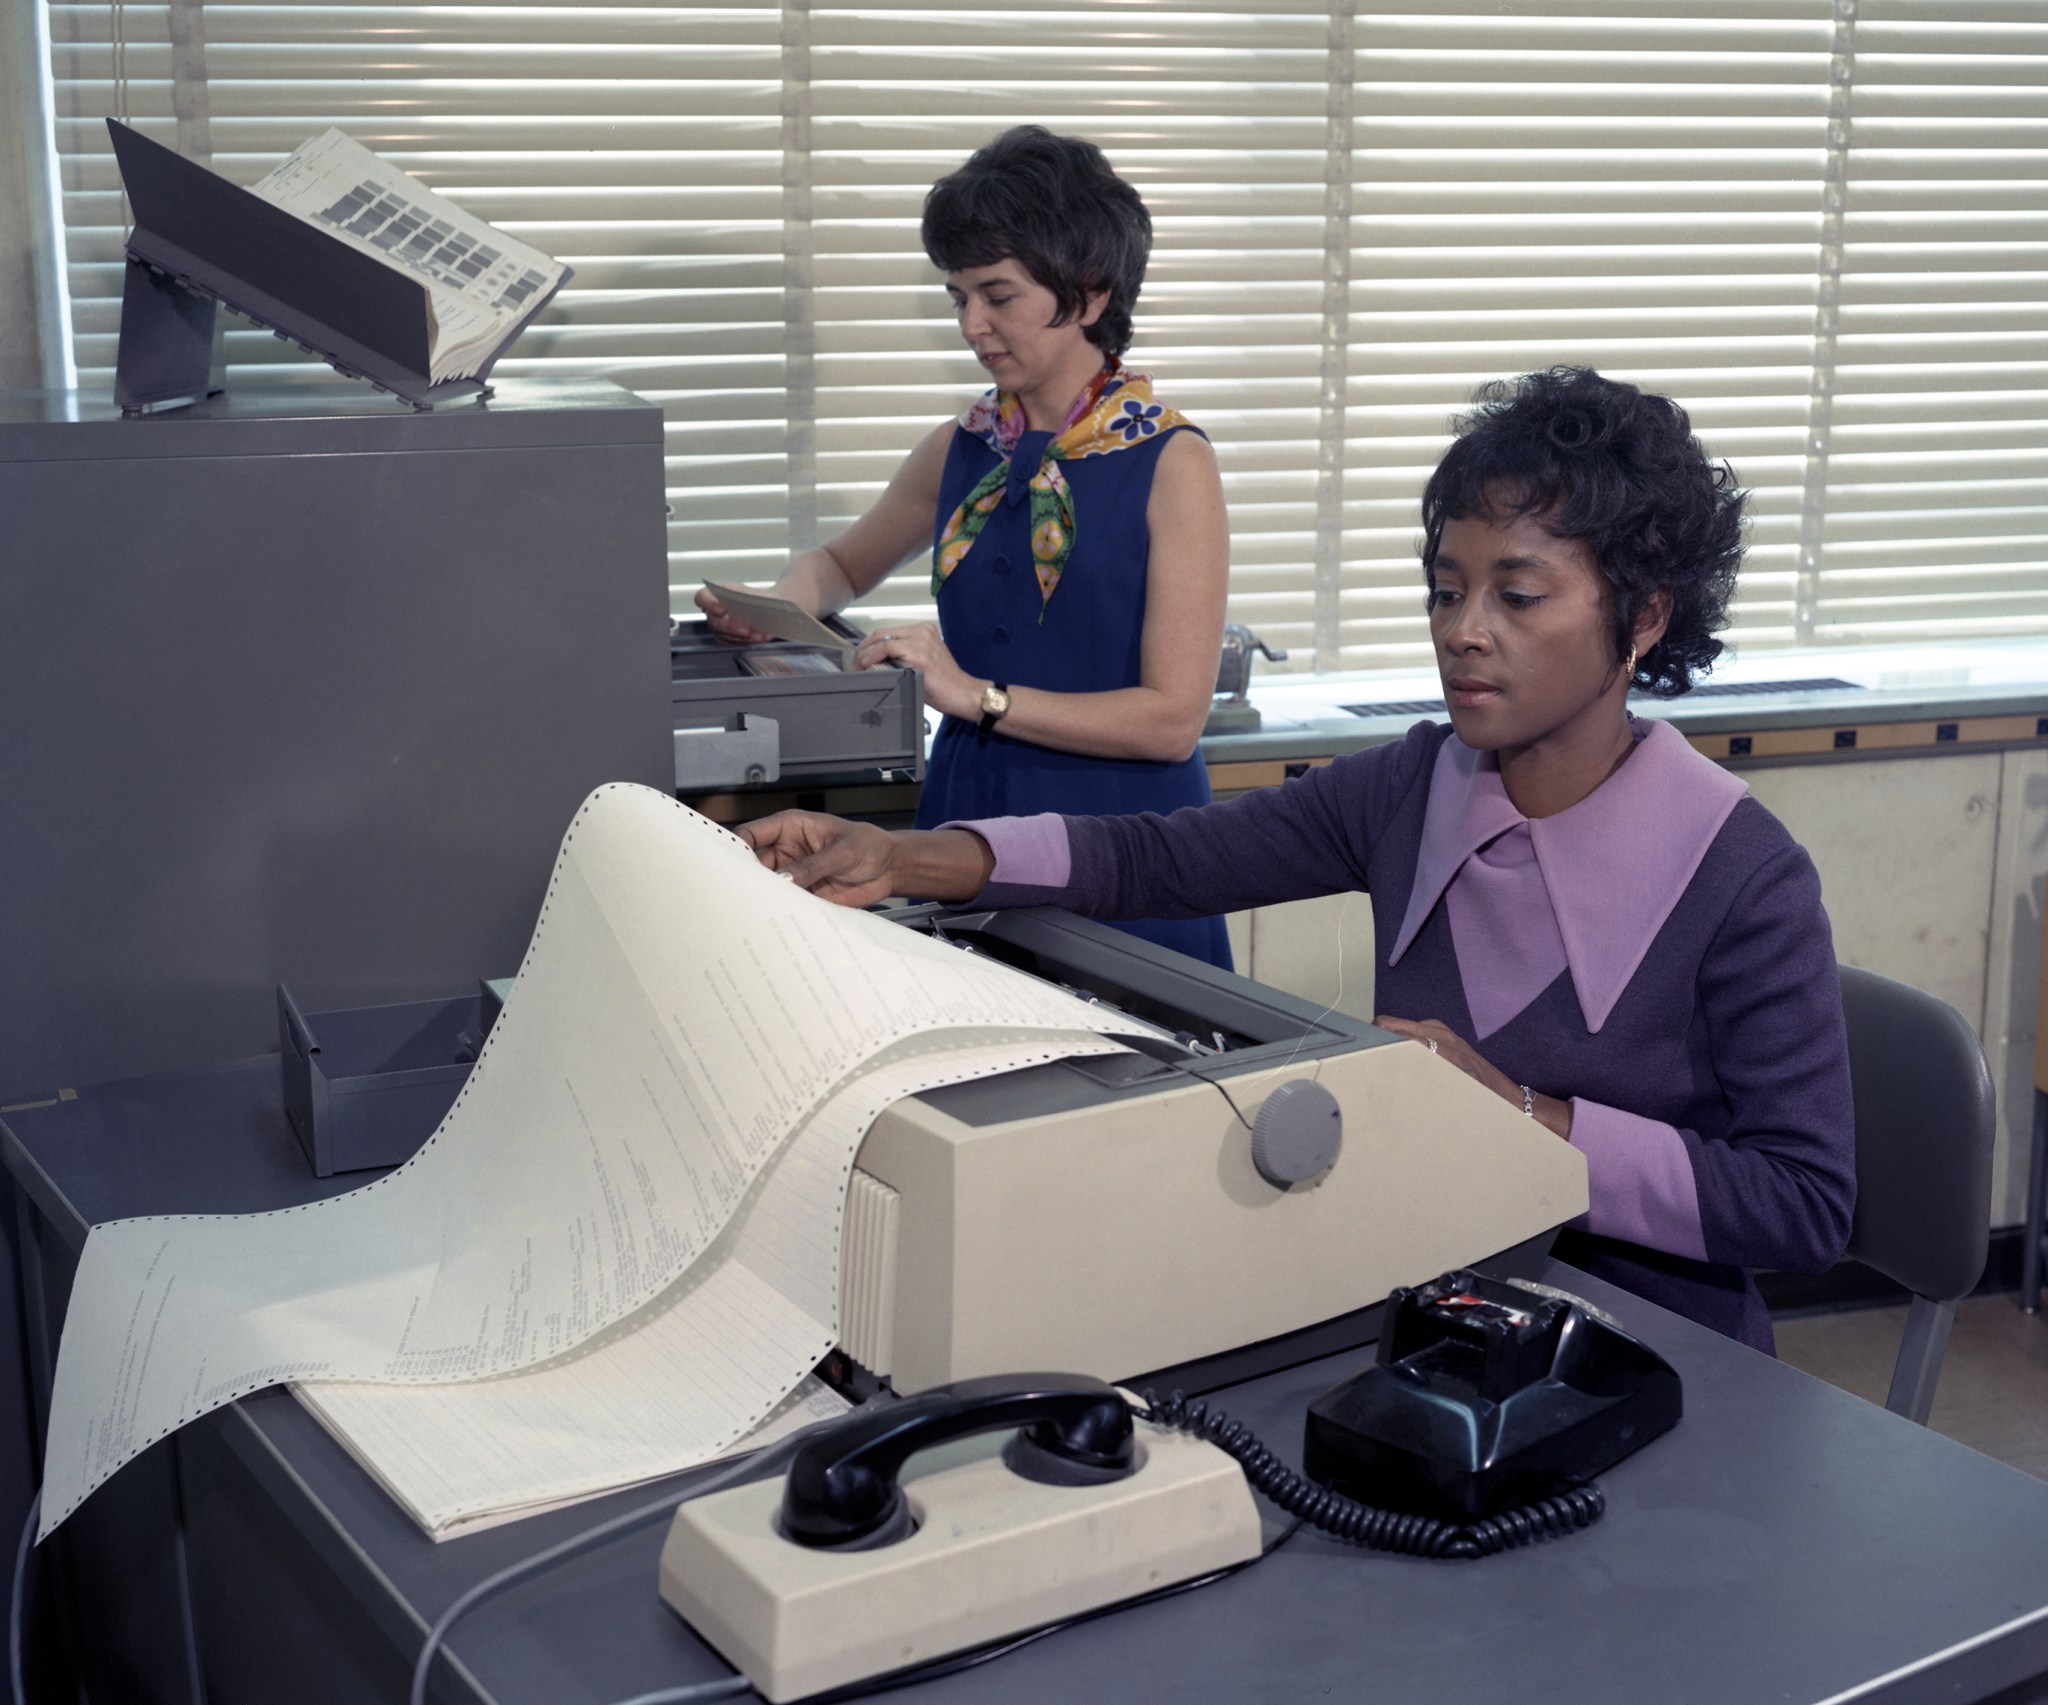 Two seated women working with computers.